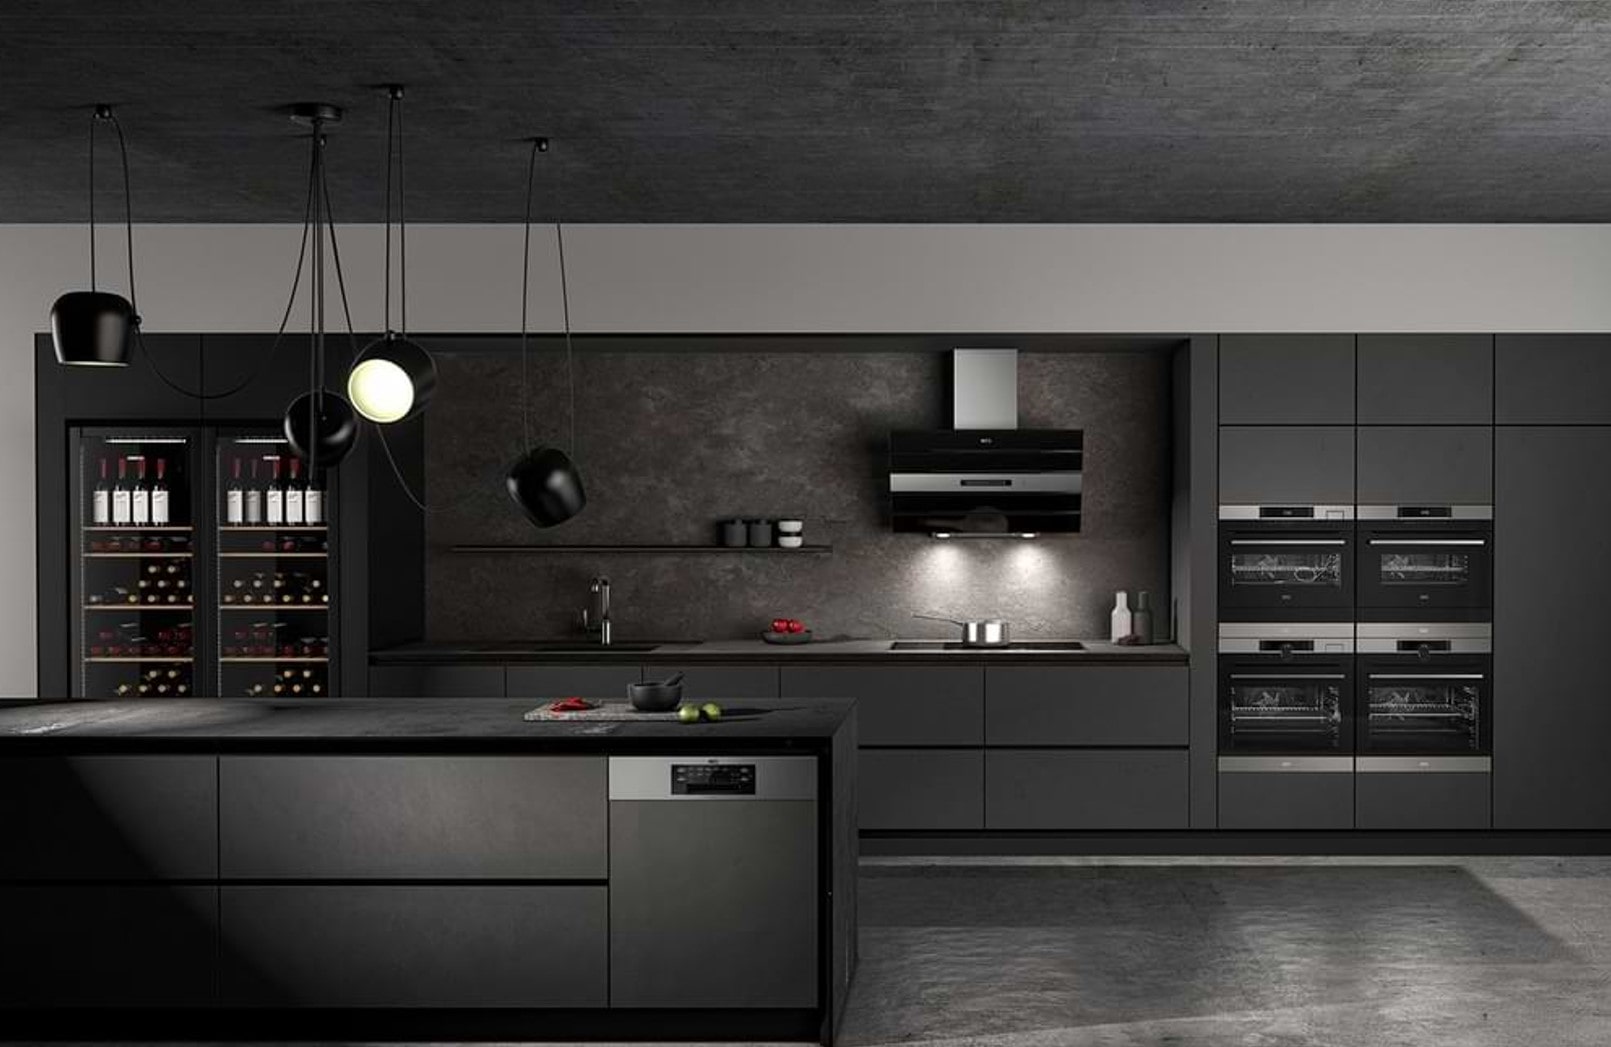 A very modern kitchen with all black counter tops, cupboards, fittings and splashback.